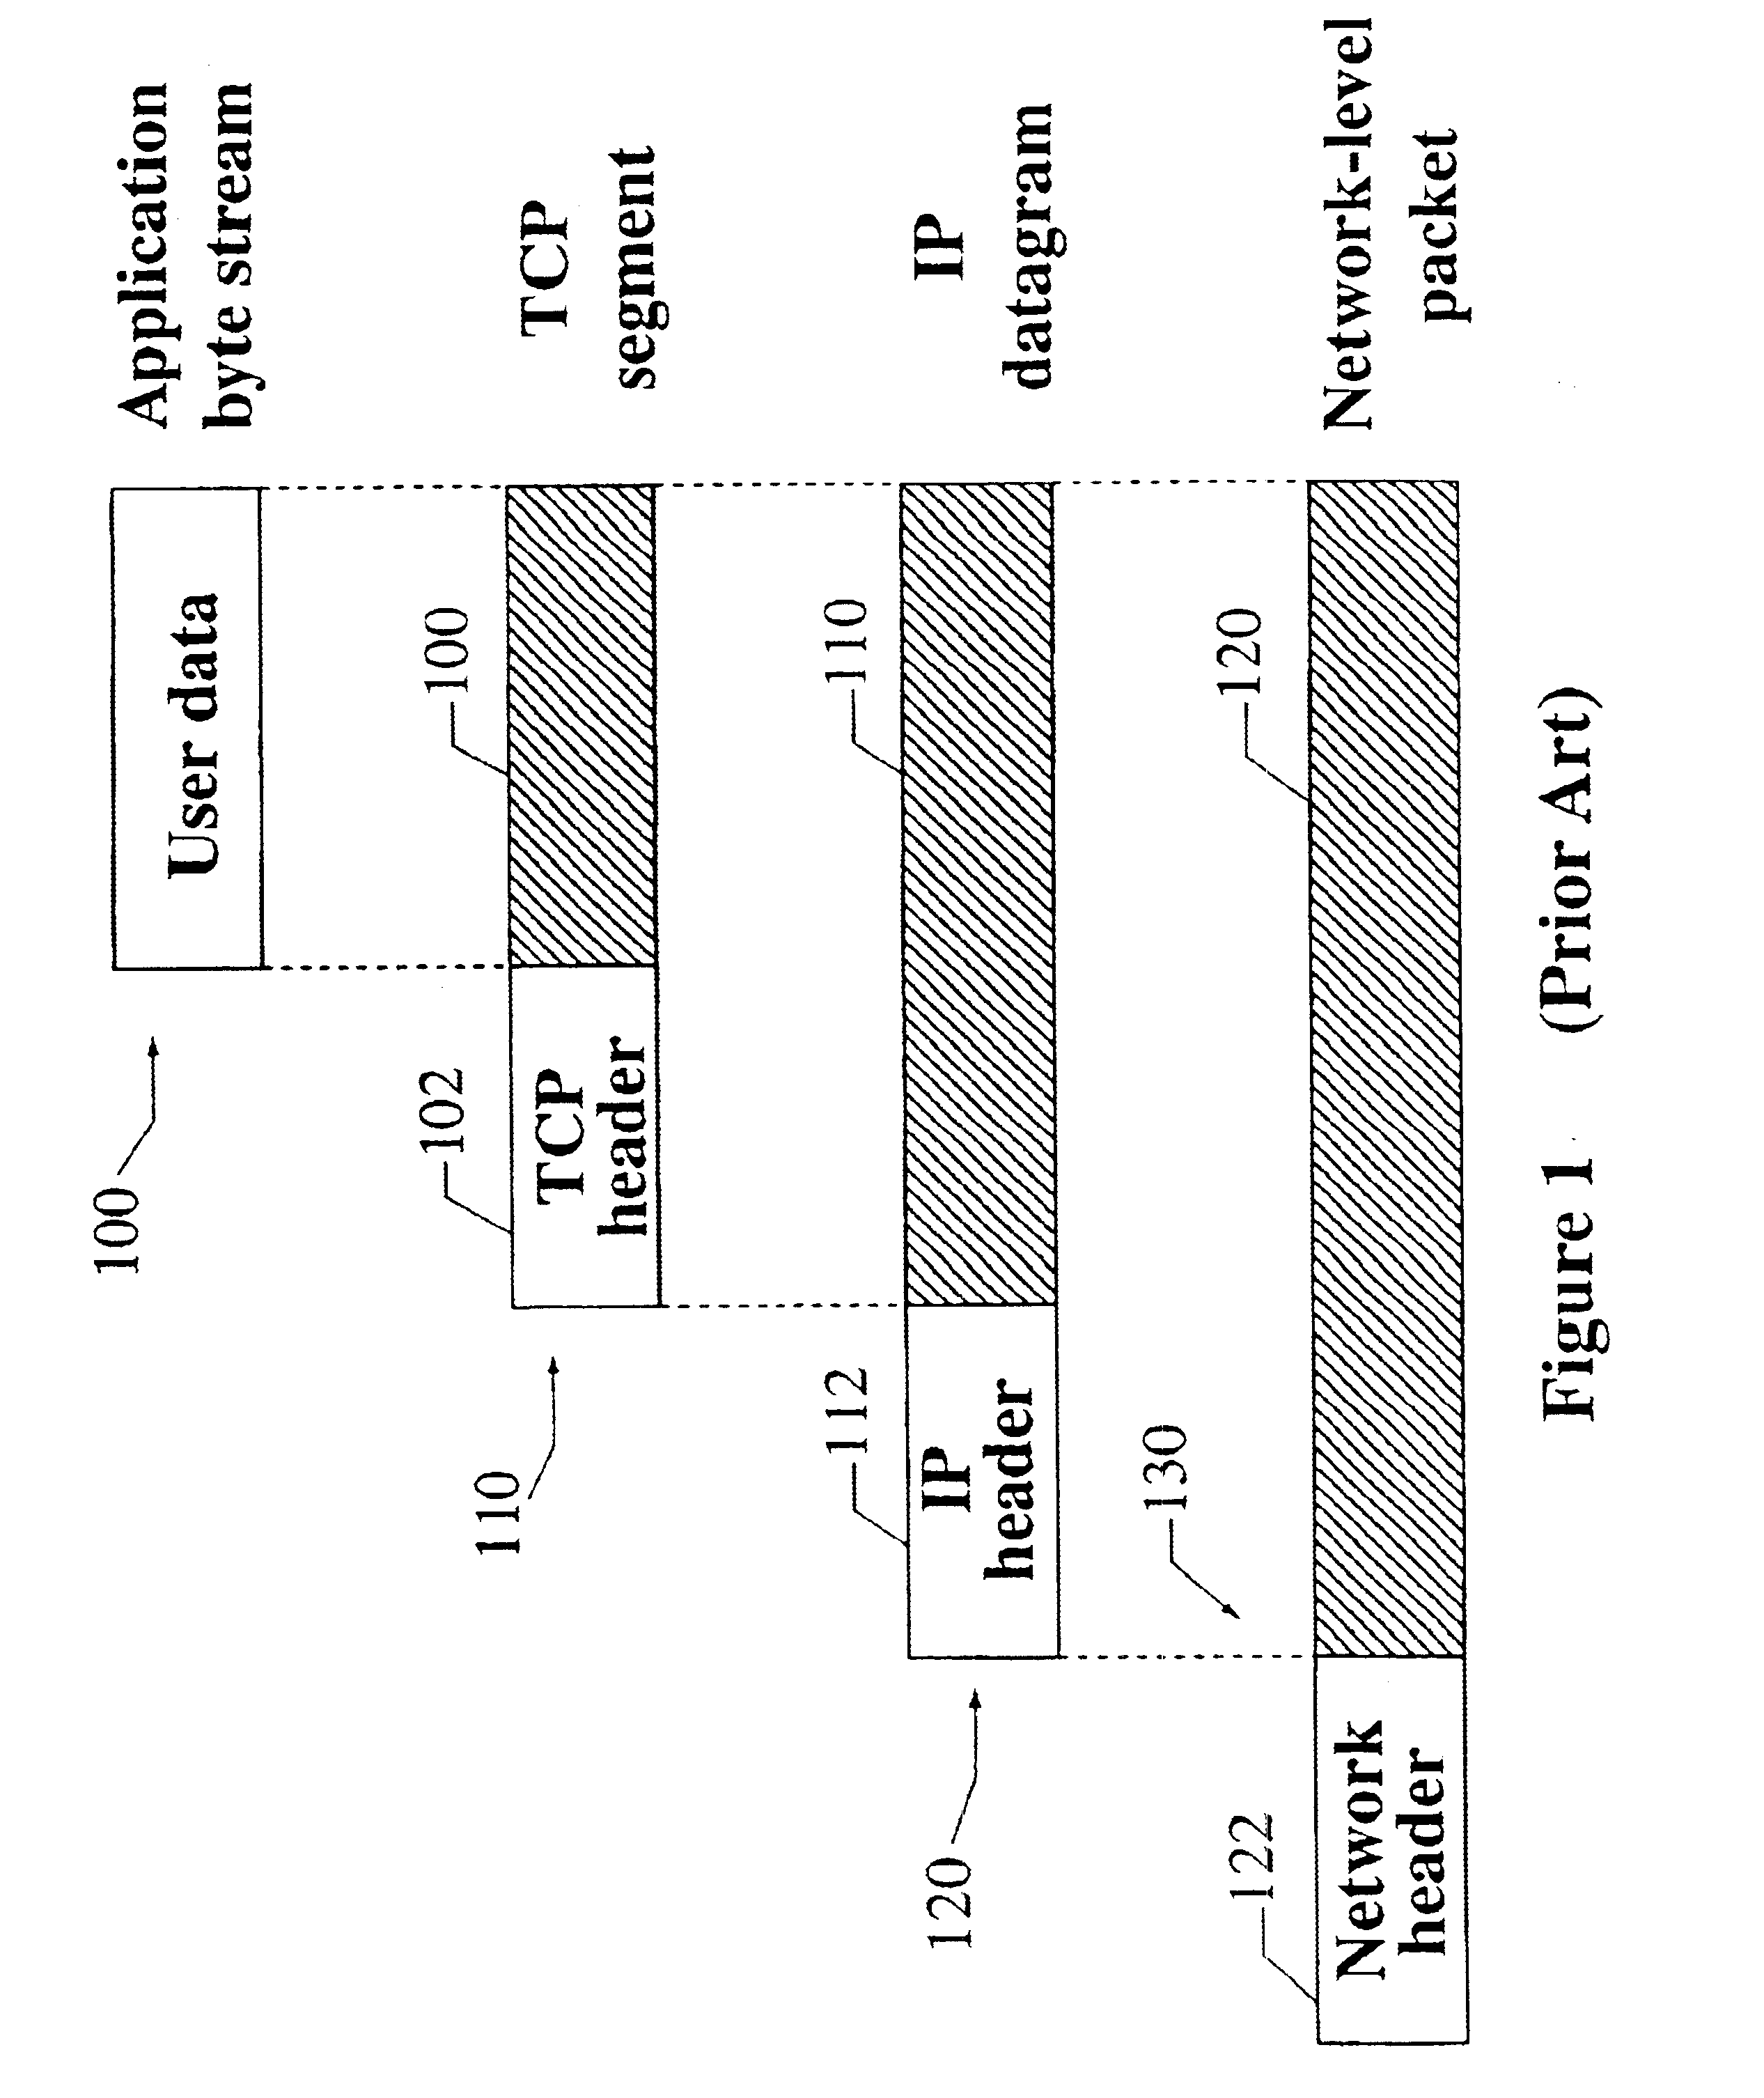 Methods and apparatus for arbitrating output port contention in a switch having virtual output queuing